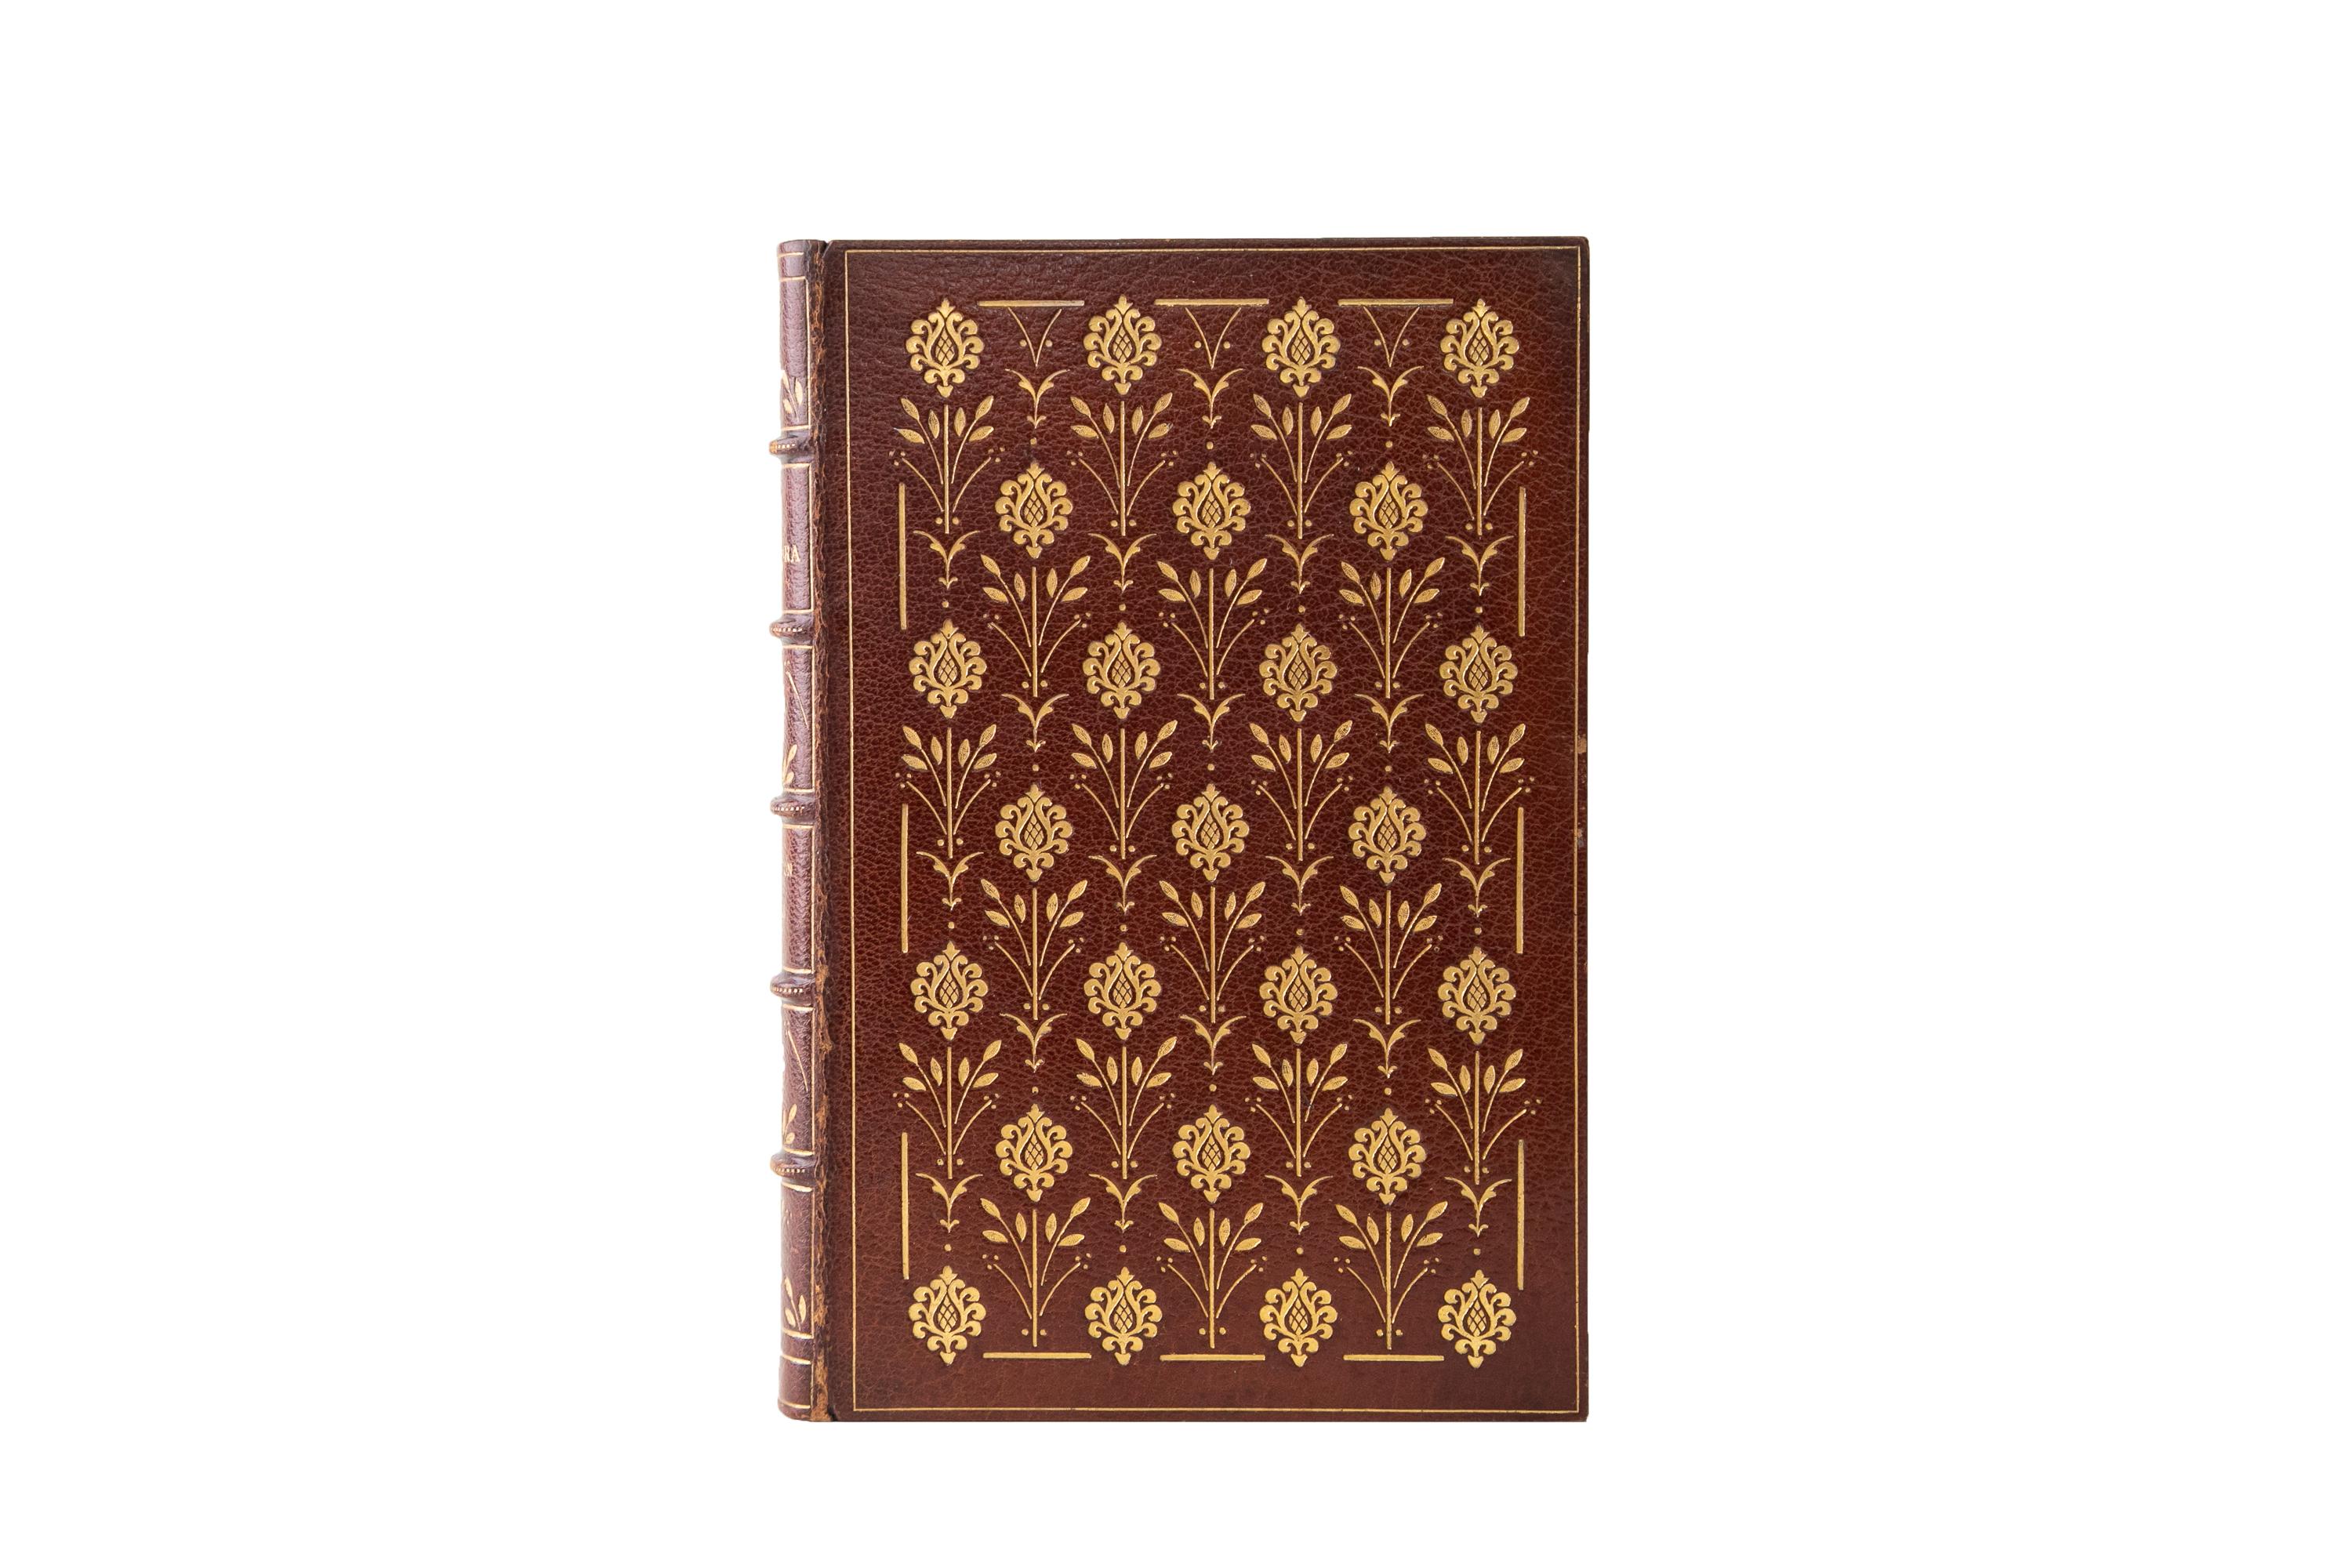 1 Volume. Washington Irving, The Alhambra. Bound by Zaehnsdorf in full brown morocco with the covers displaying expansive floral gilt-tooling. The spines display raised bands, bordering, floral panel details, and label lettering, all gilt-tooled.